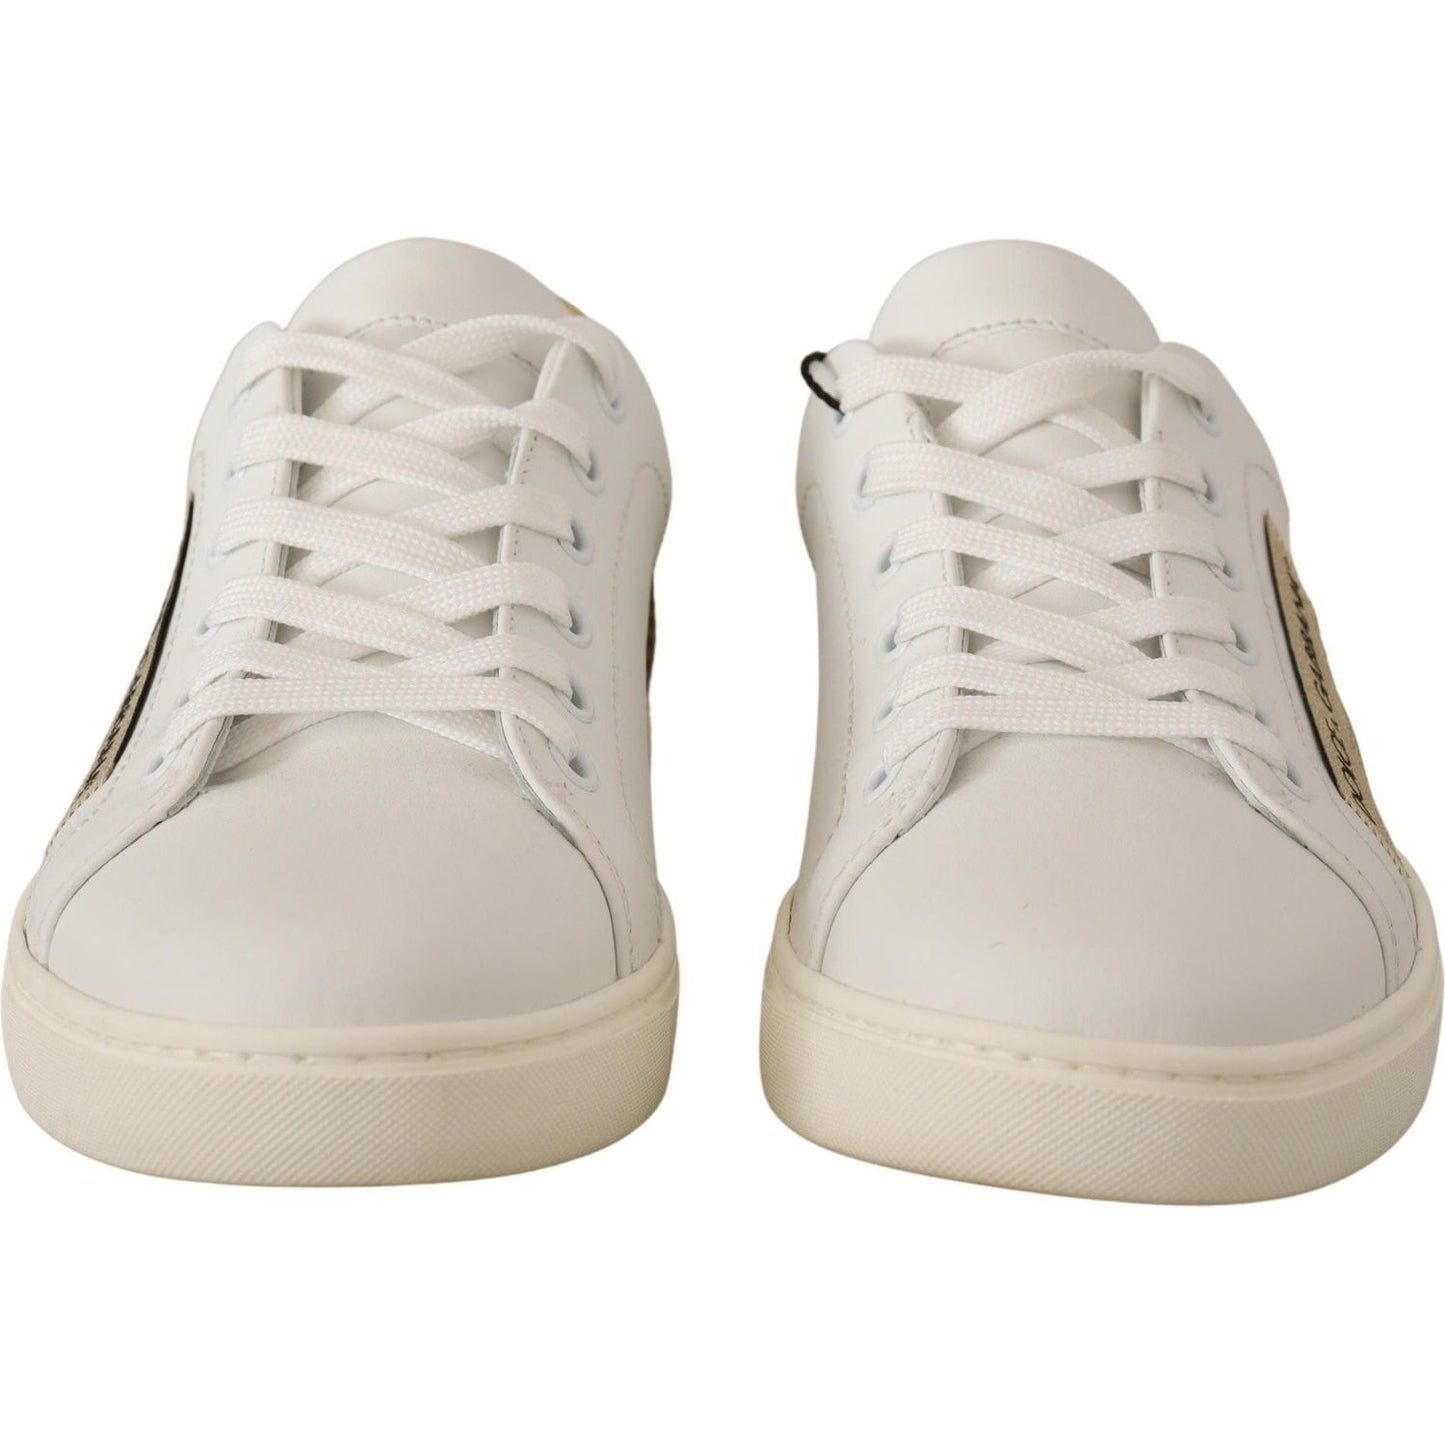 Dolce & Gabbana Elegant White Leather Sneakers with Gold Accents white-gold-leather-low-top-sneakers IMG_0489-f00a3bc4-e0c.jpg